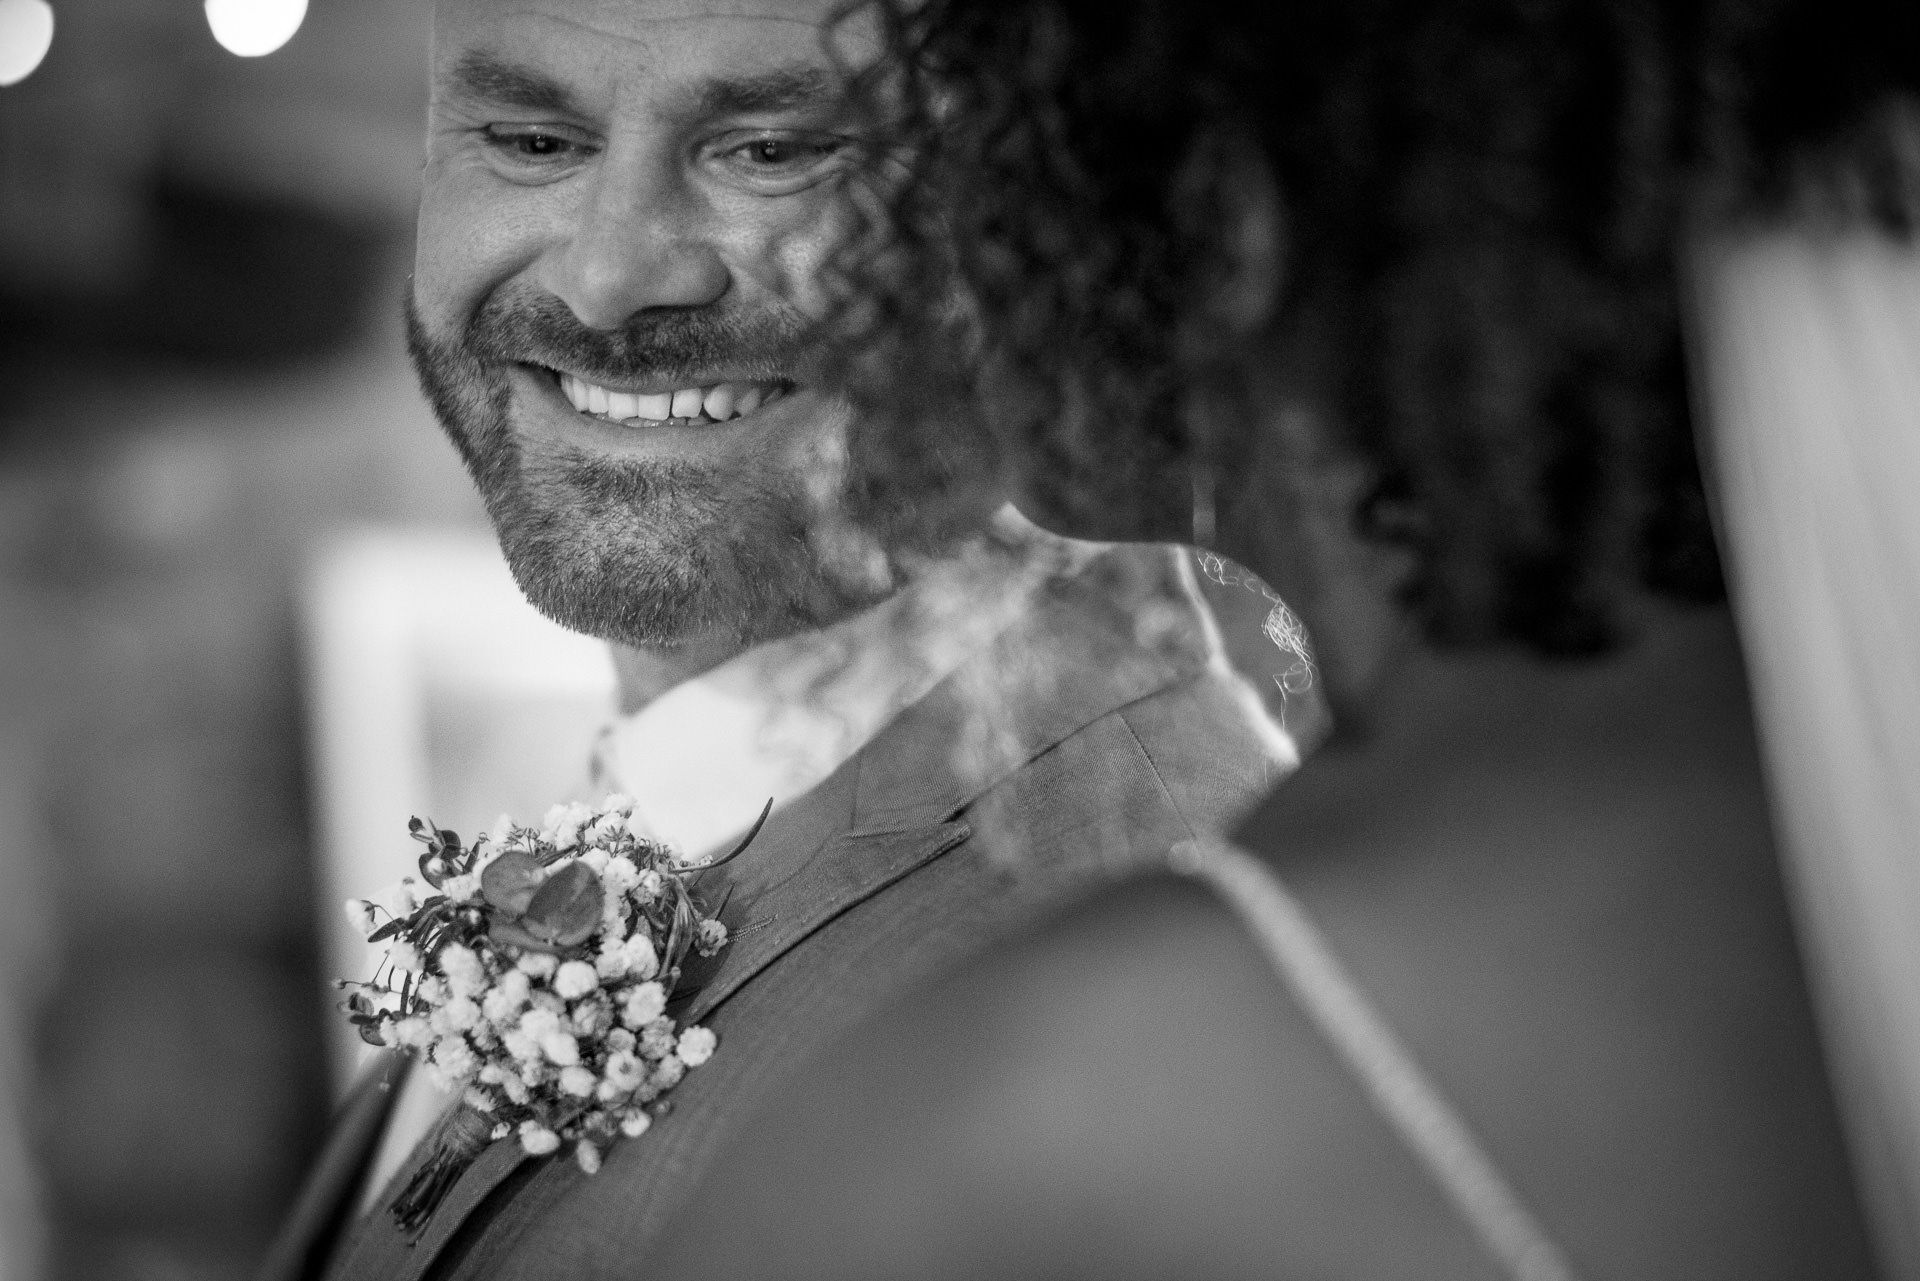 the groom smiles at his bride